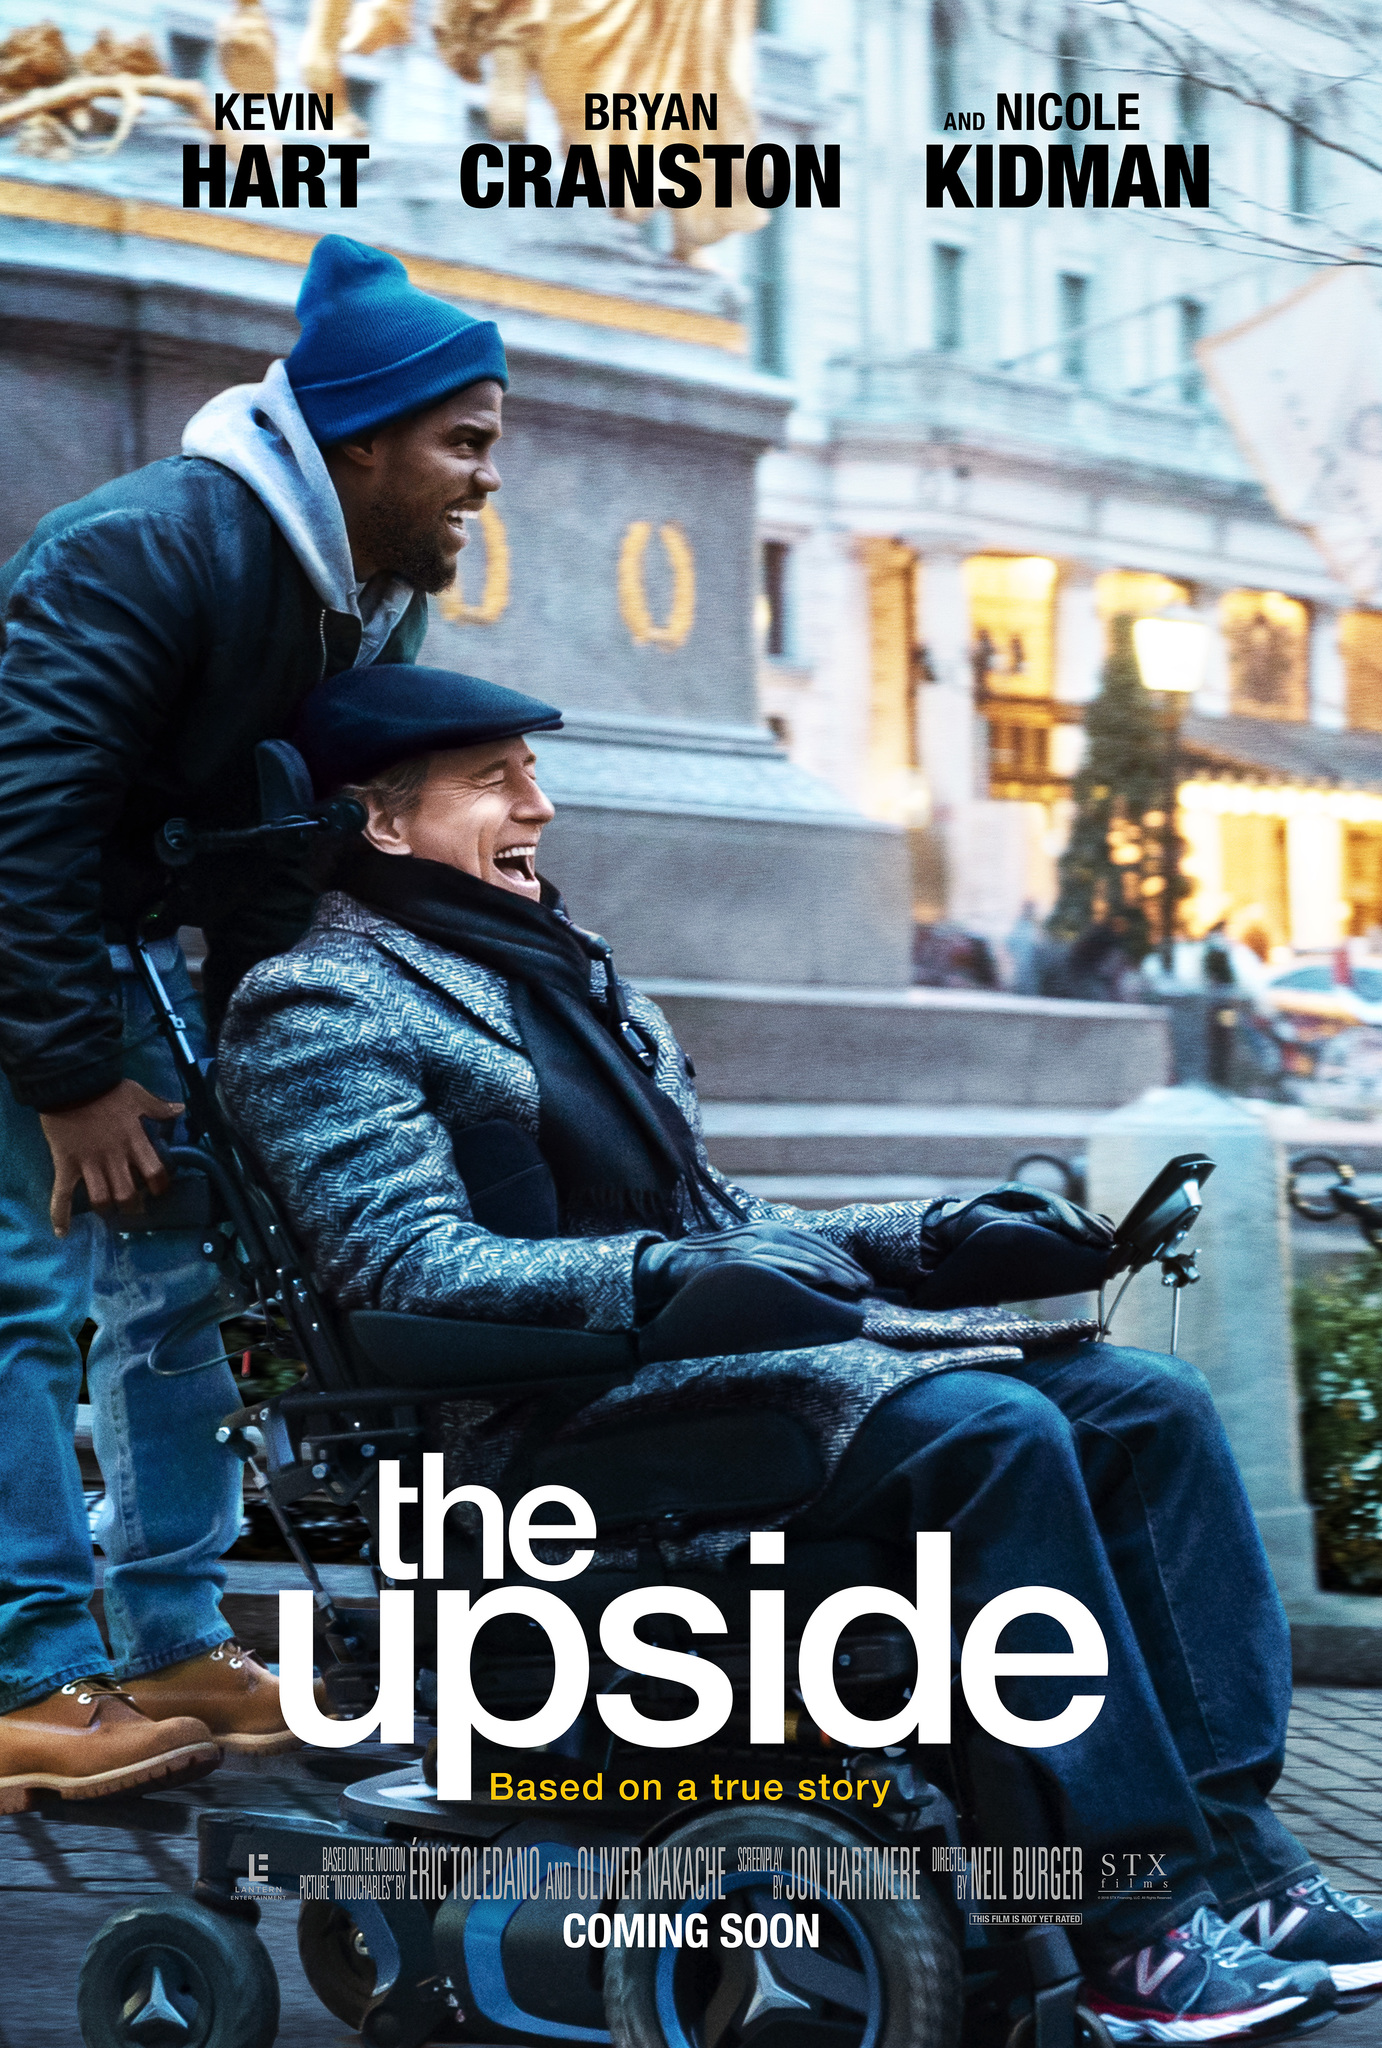 The Upside film poster